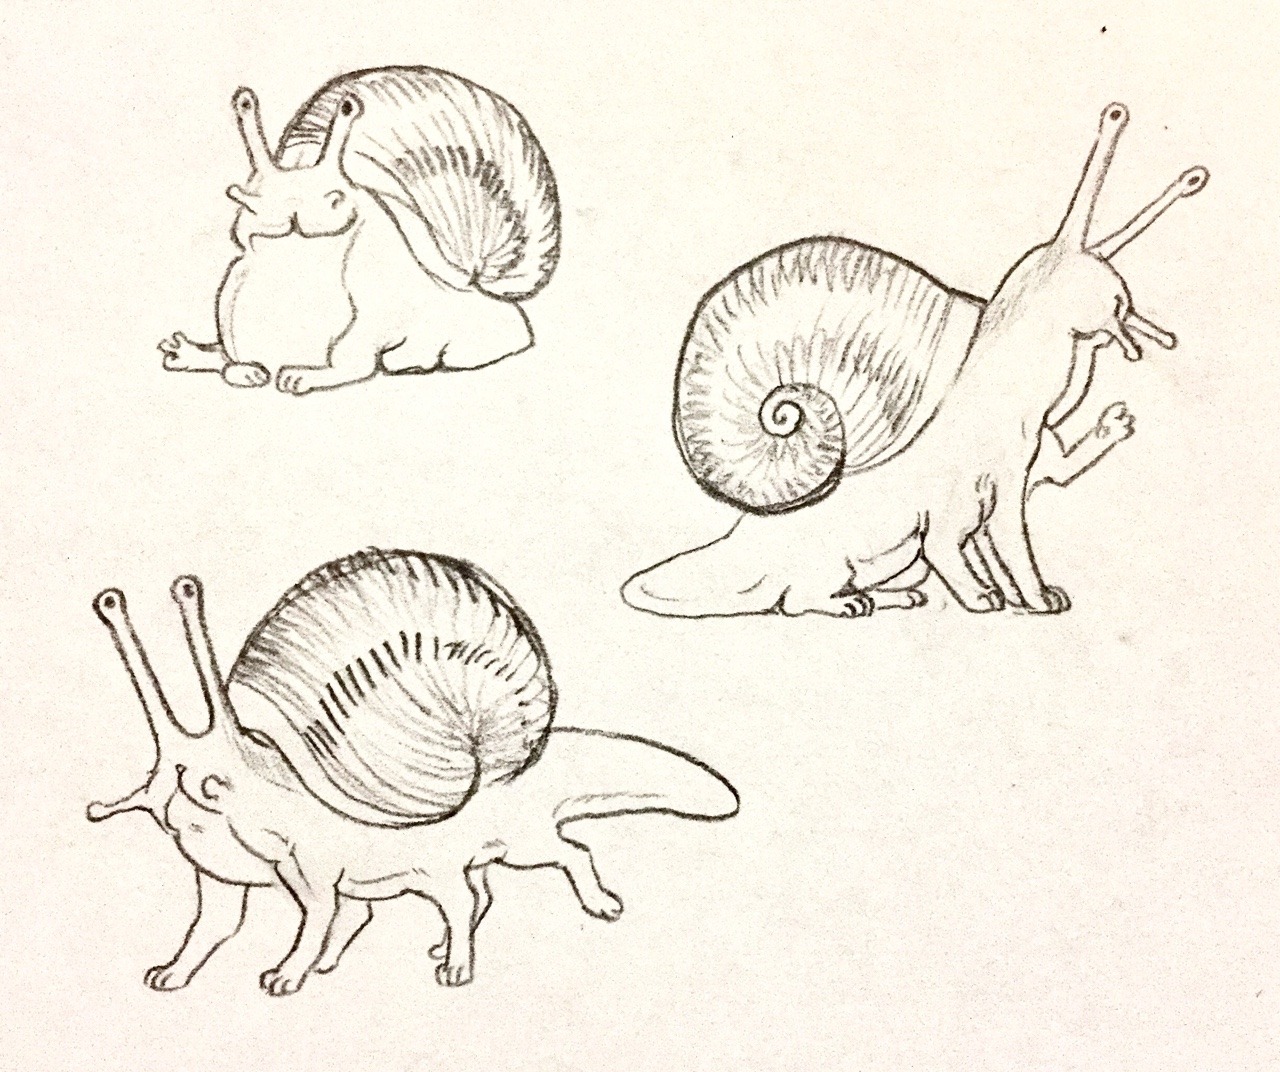 Snails with legs